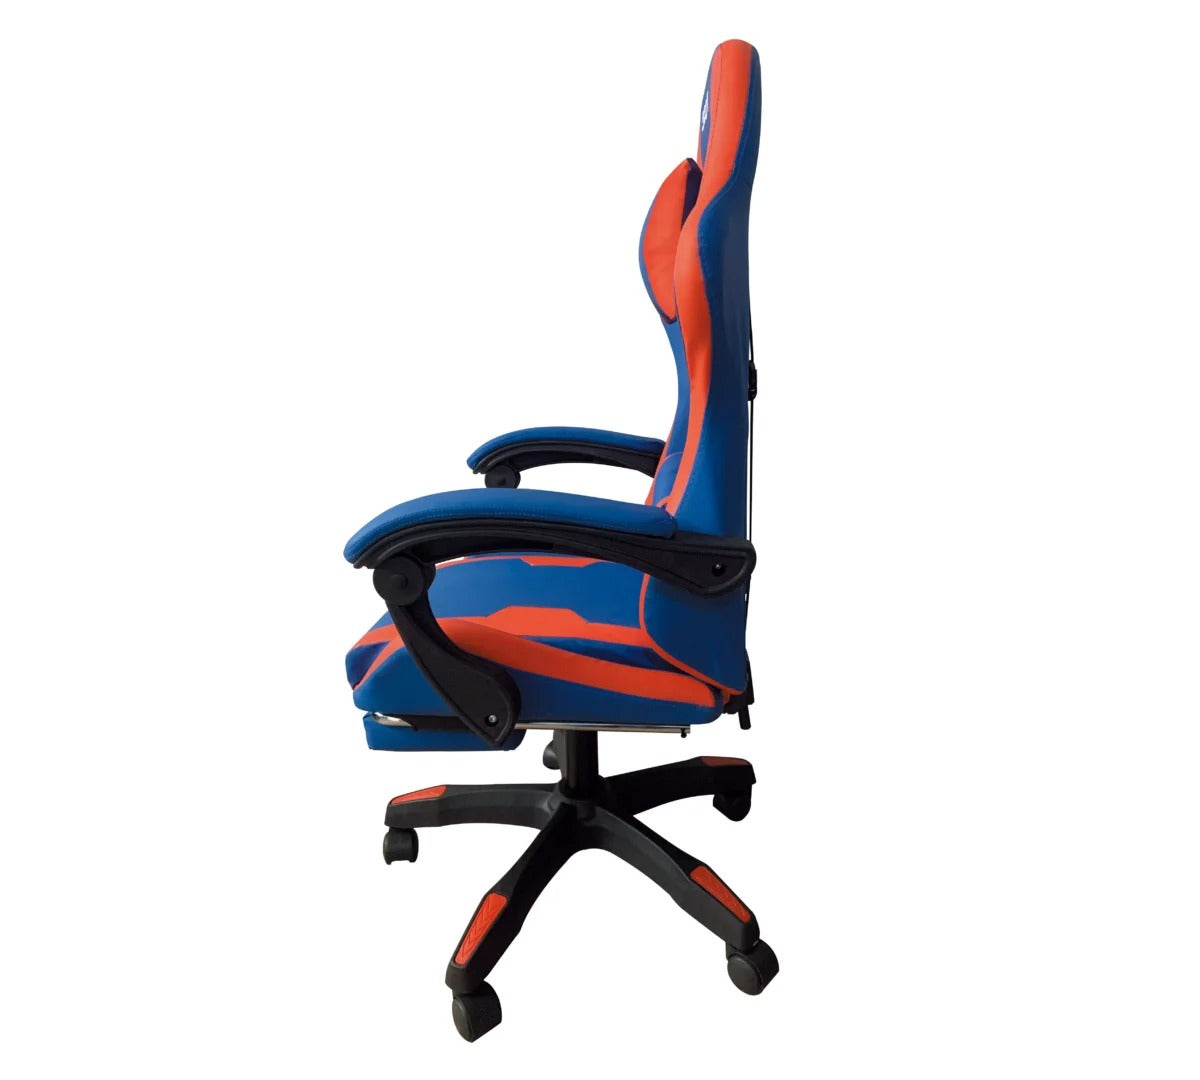 Blue Color Design Boost Surge Gaming Chair Price in Pakistan